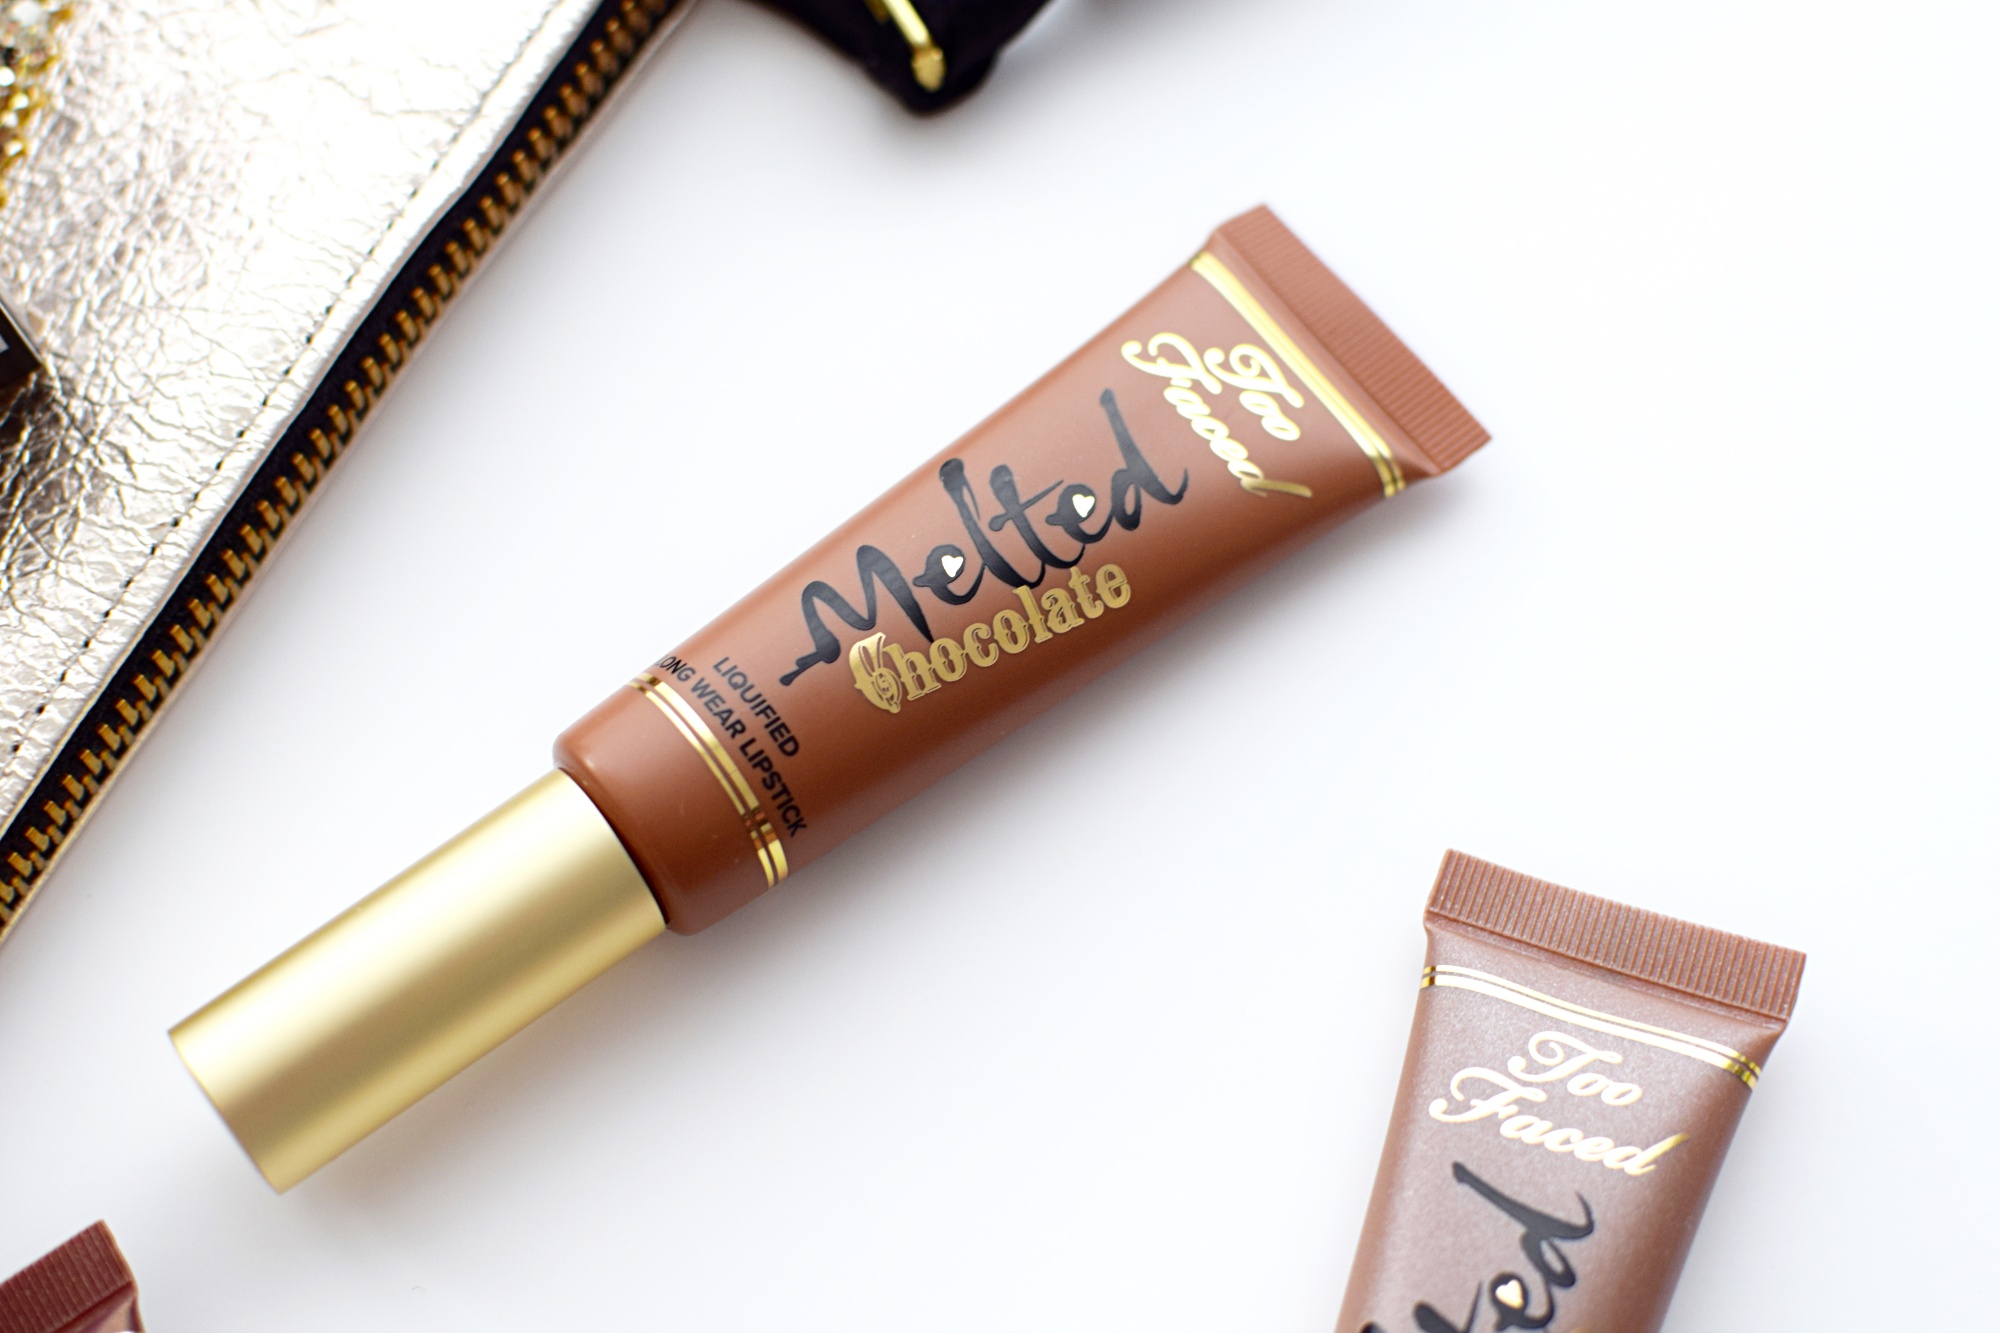 Too Faced Melted Chocolate Liquid Lipstick Review